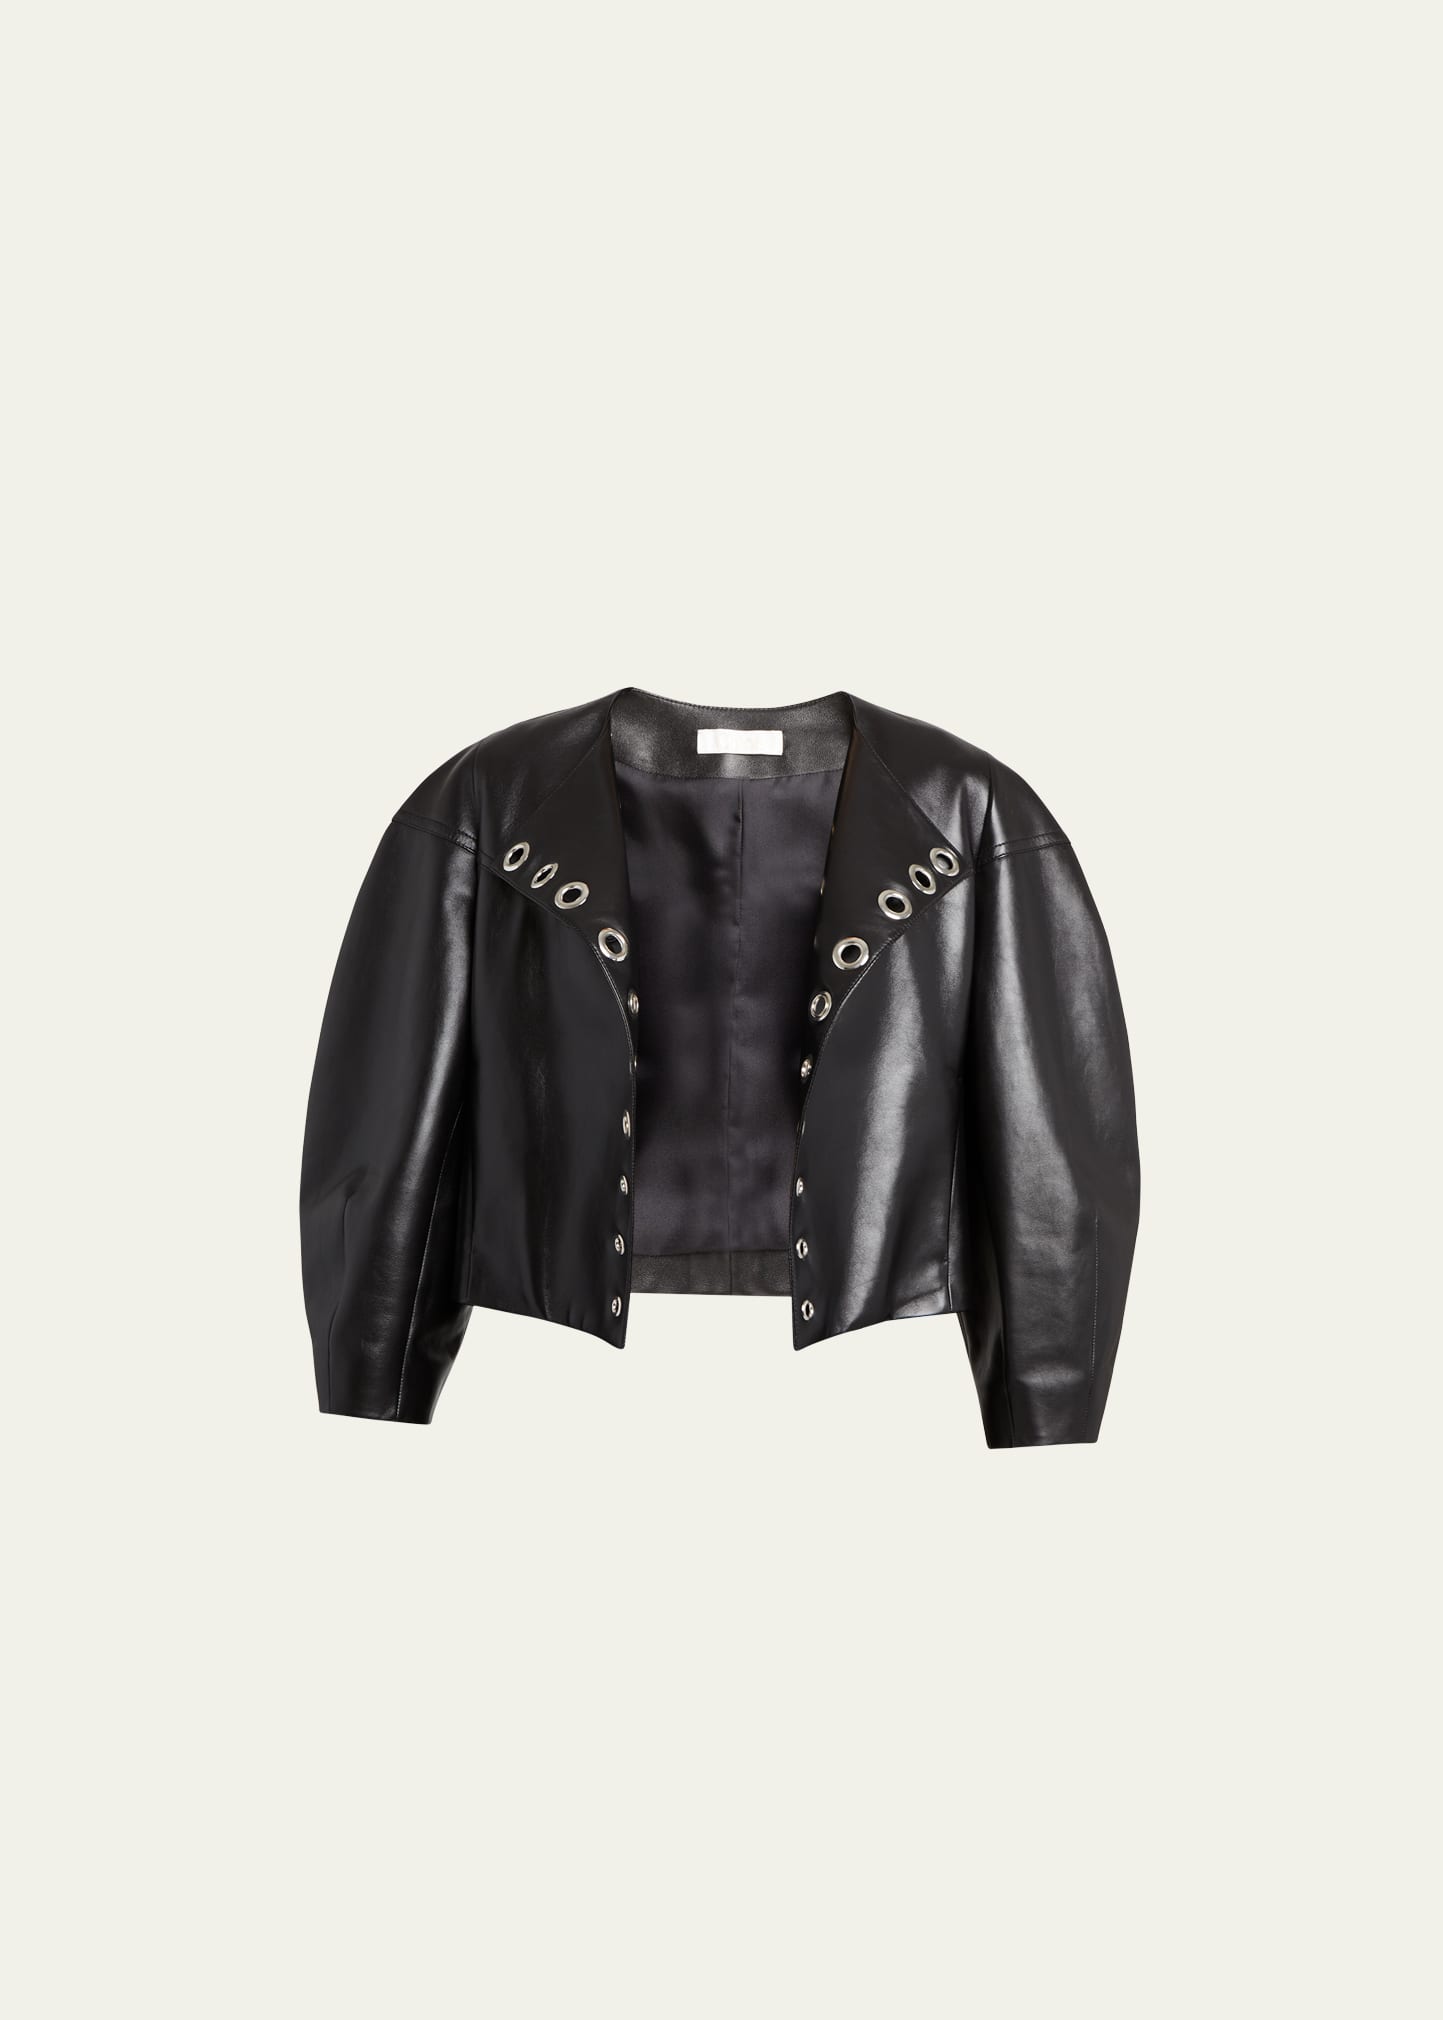 CHLOÉ LEATHER SHORT JACKET WITH GROMMET DETAIL